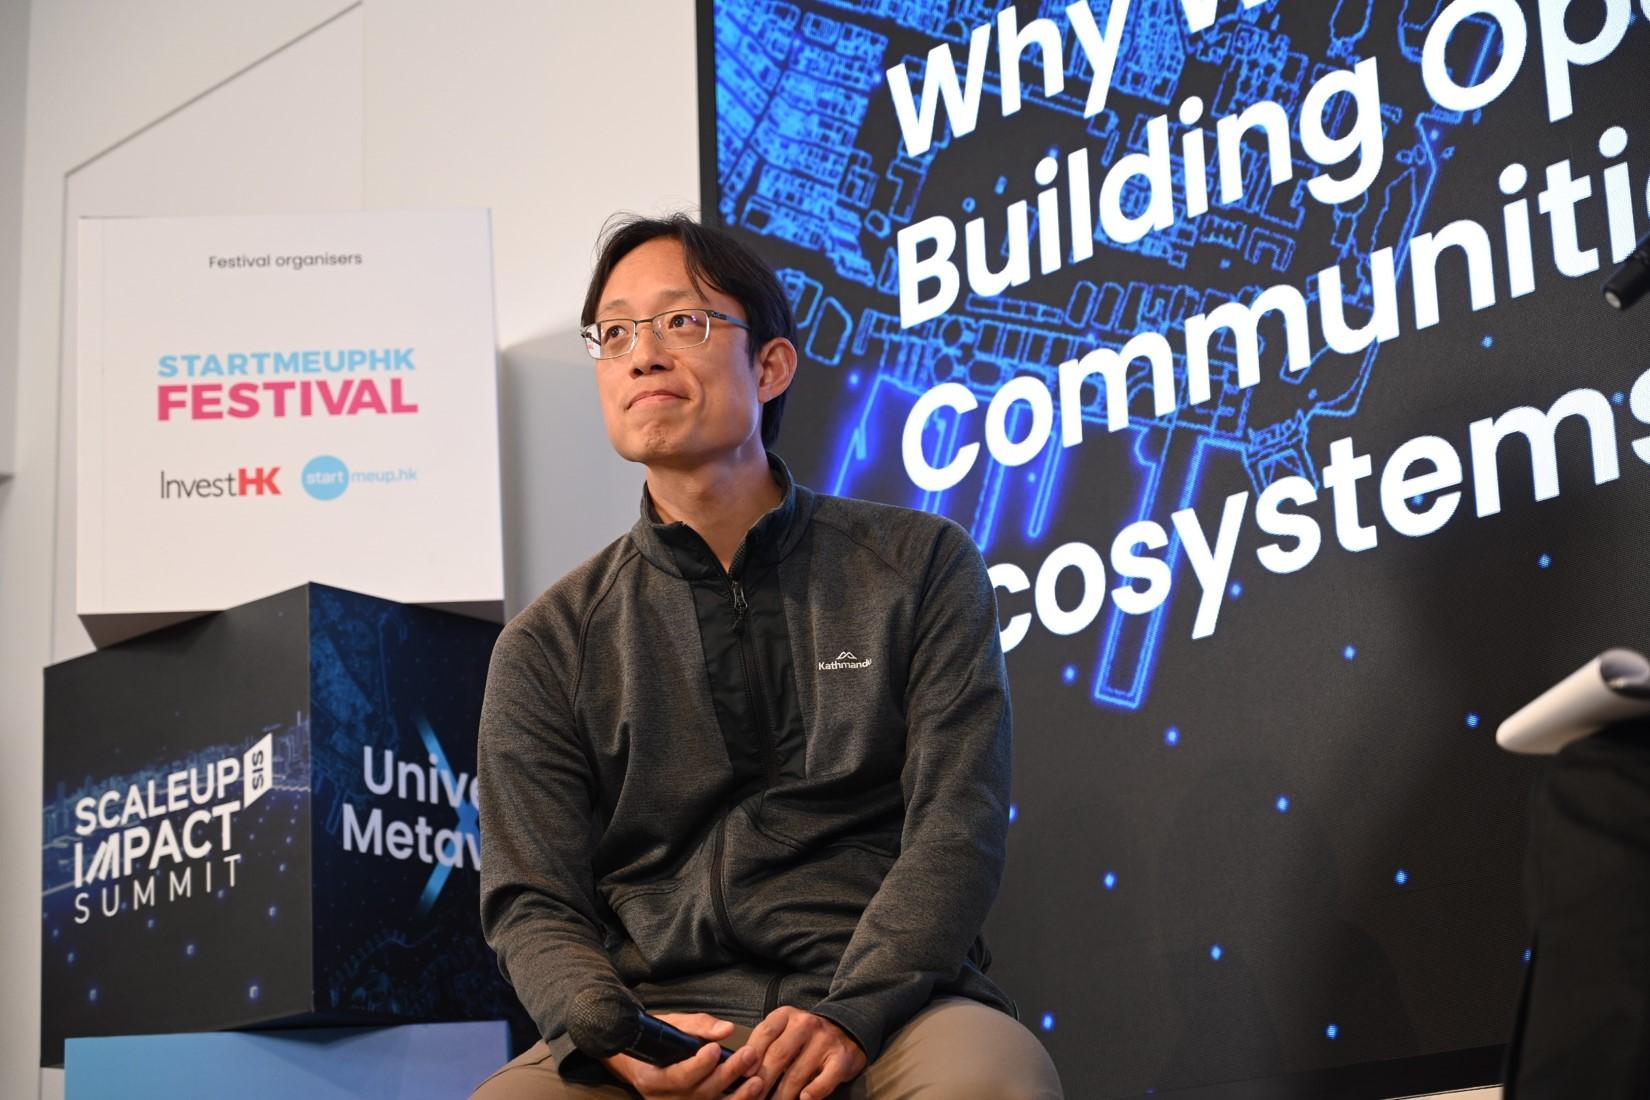 StartmeupHK Festival 2022 returned in a hybrid format this year, featuring 556 speakers and attracting over 20 000 participants from more than 100 countries and territories. Photo shows the Co-founder and Chairman of Animoca Brands, Yat Siu at WHub's Scaleup Impact Summit - Universe x Metaverse.  